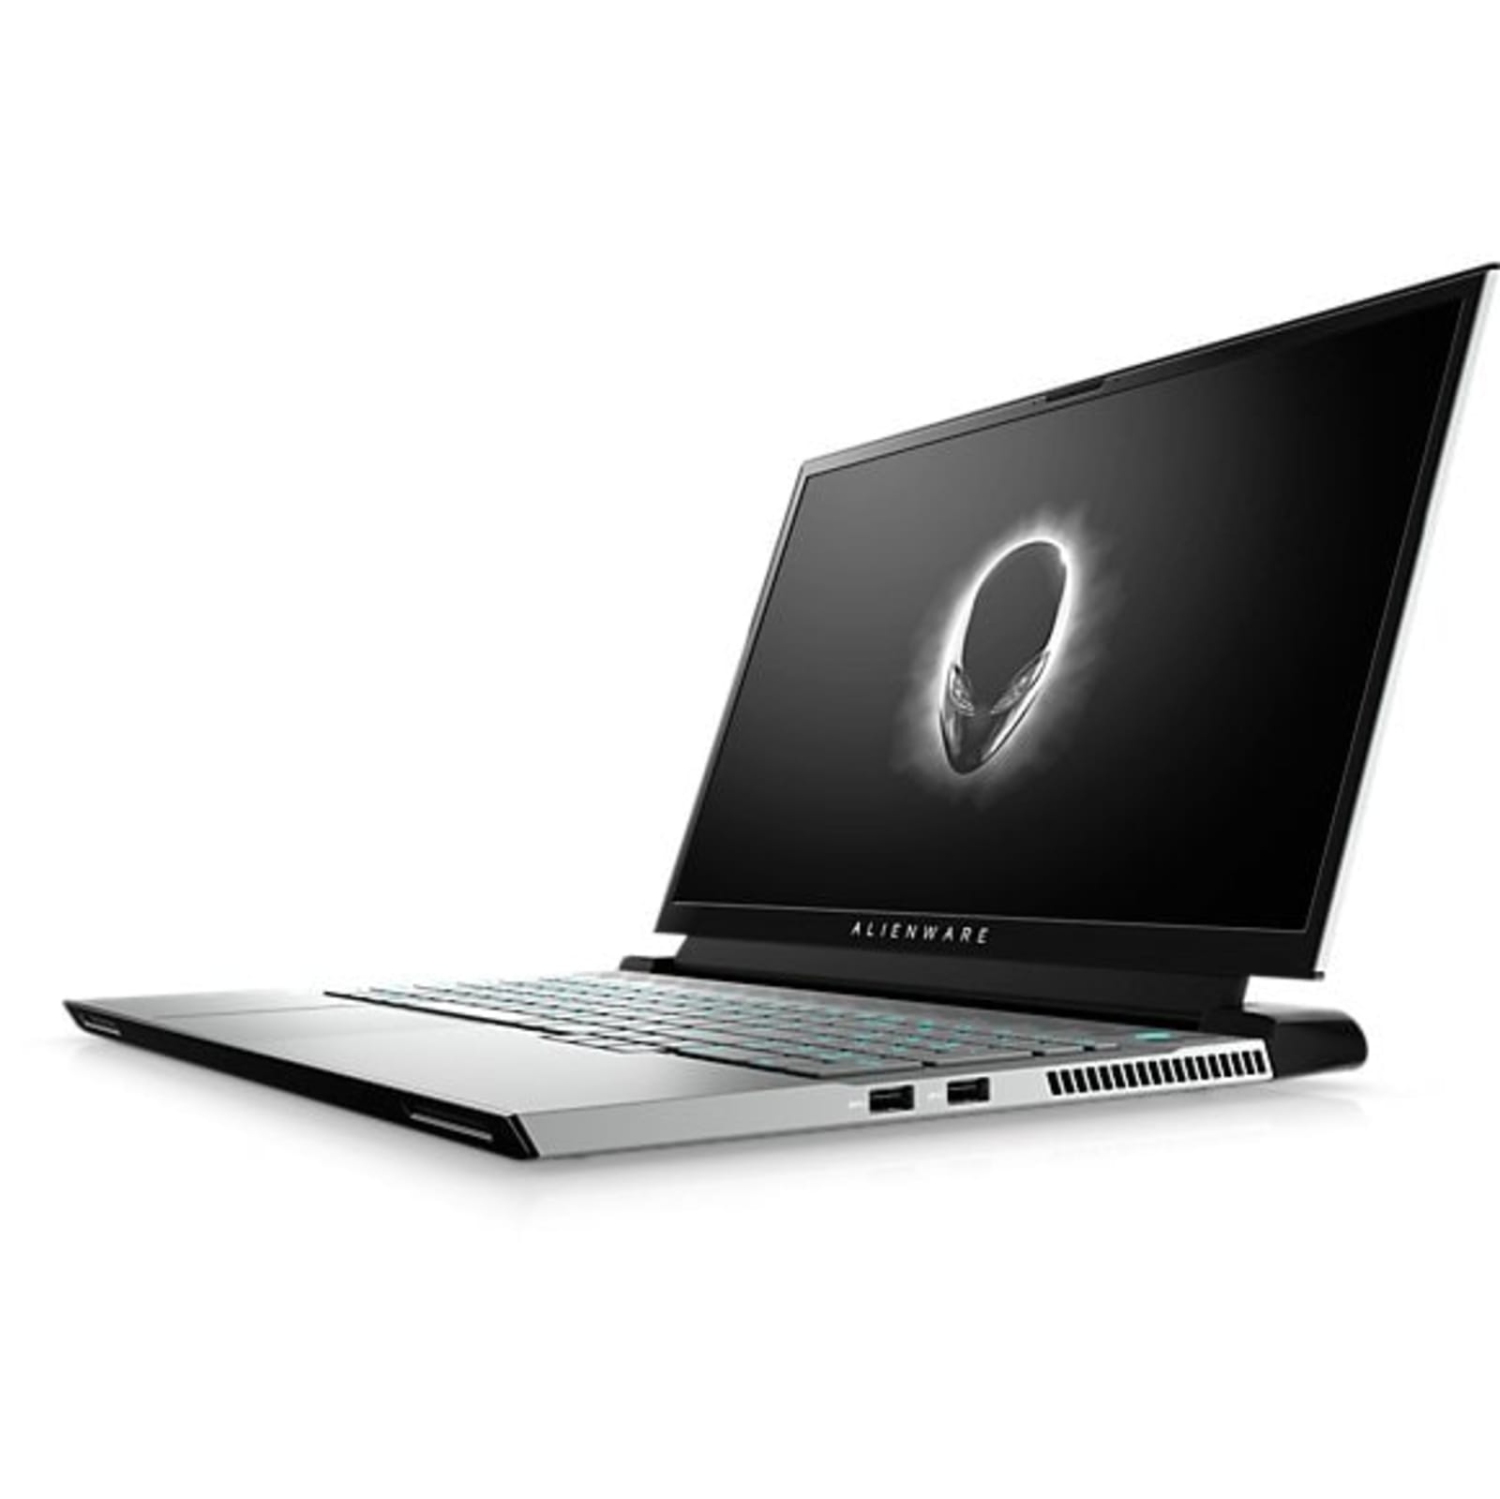 Refurbished (Excellent) - Dell Alienware m17 R2 Gaming Laptop (2019) |  17.3 FHD | Core i7 - 512GB SSD - 16GB RAM - 1660 Ti | 6 Cores @ 4.5 GHz  Certified Refurbished | Best Buy Canada